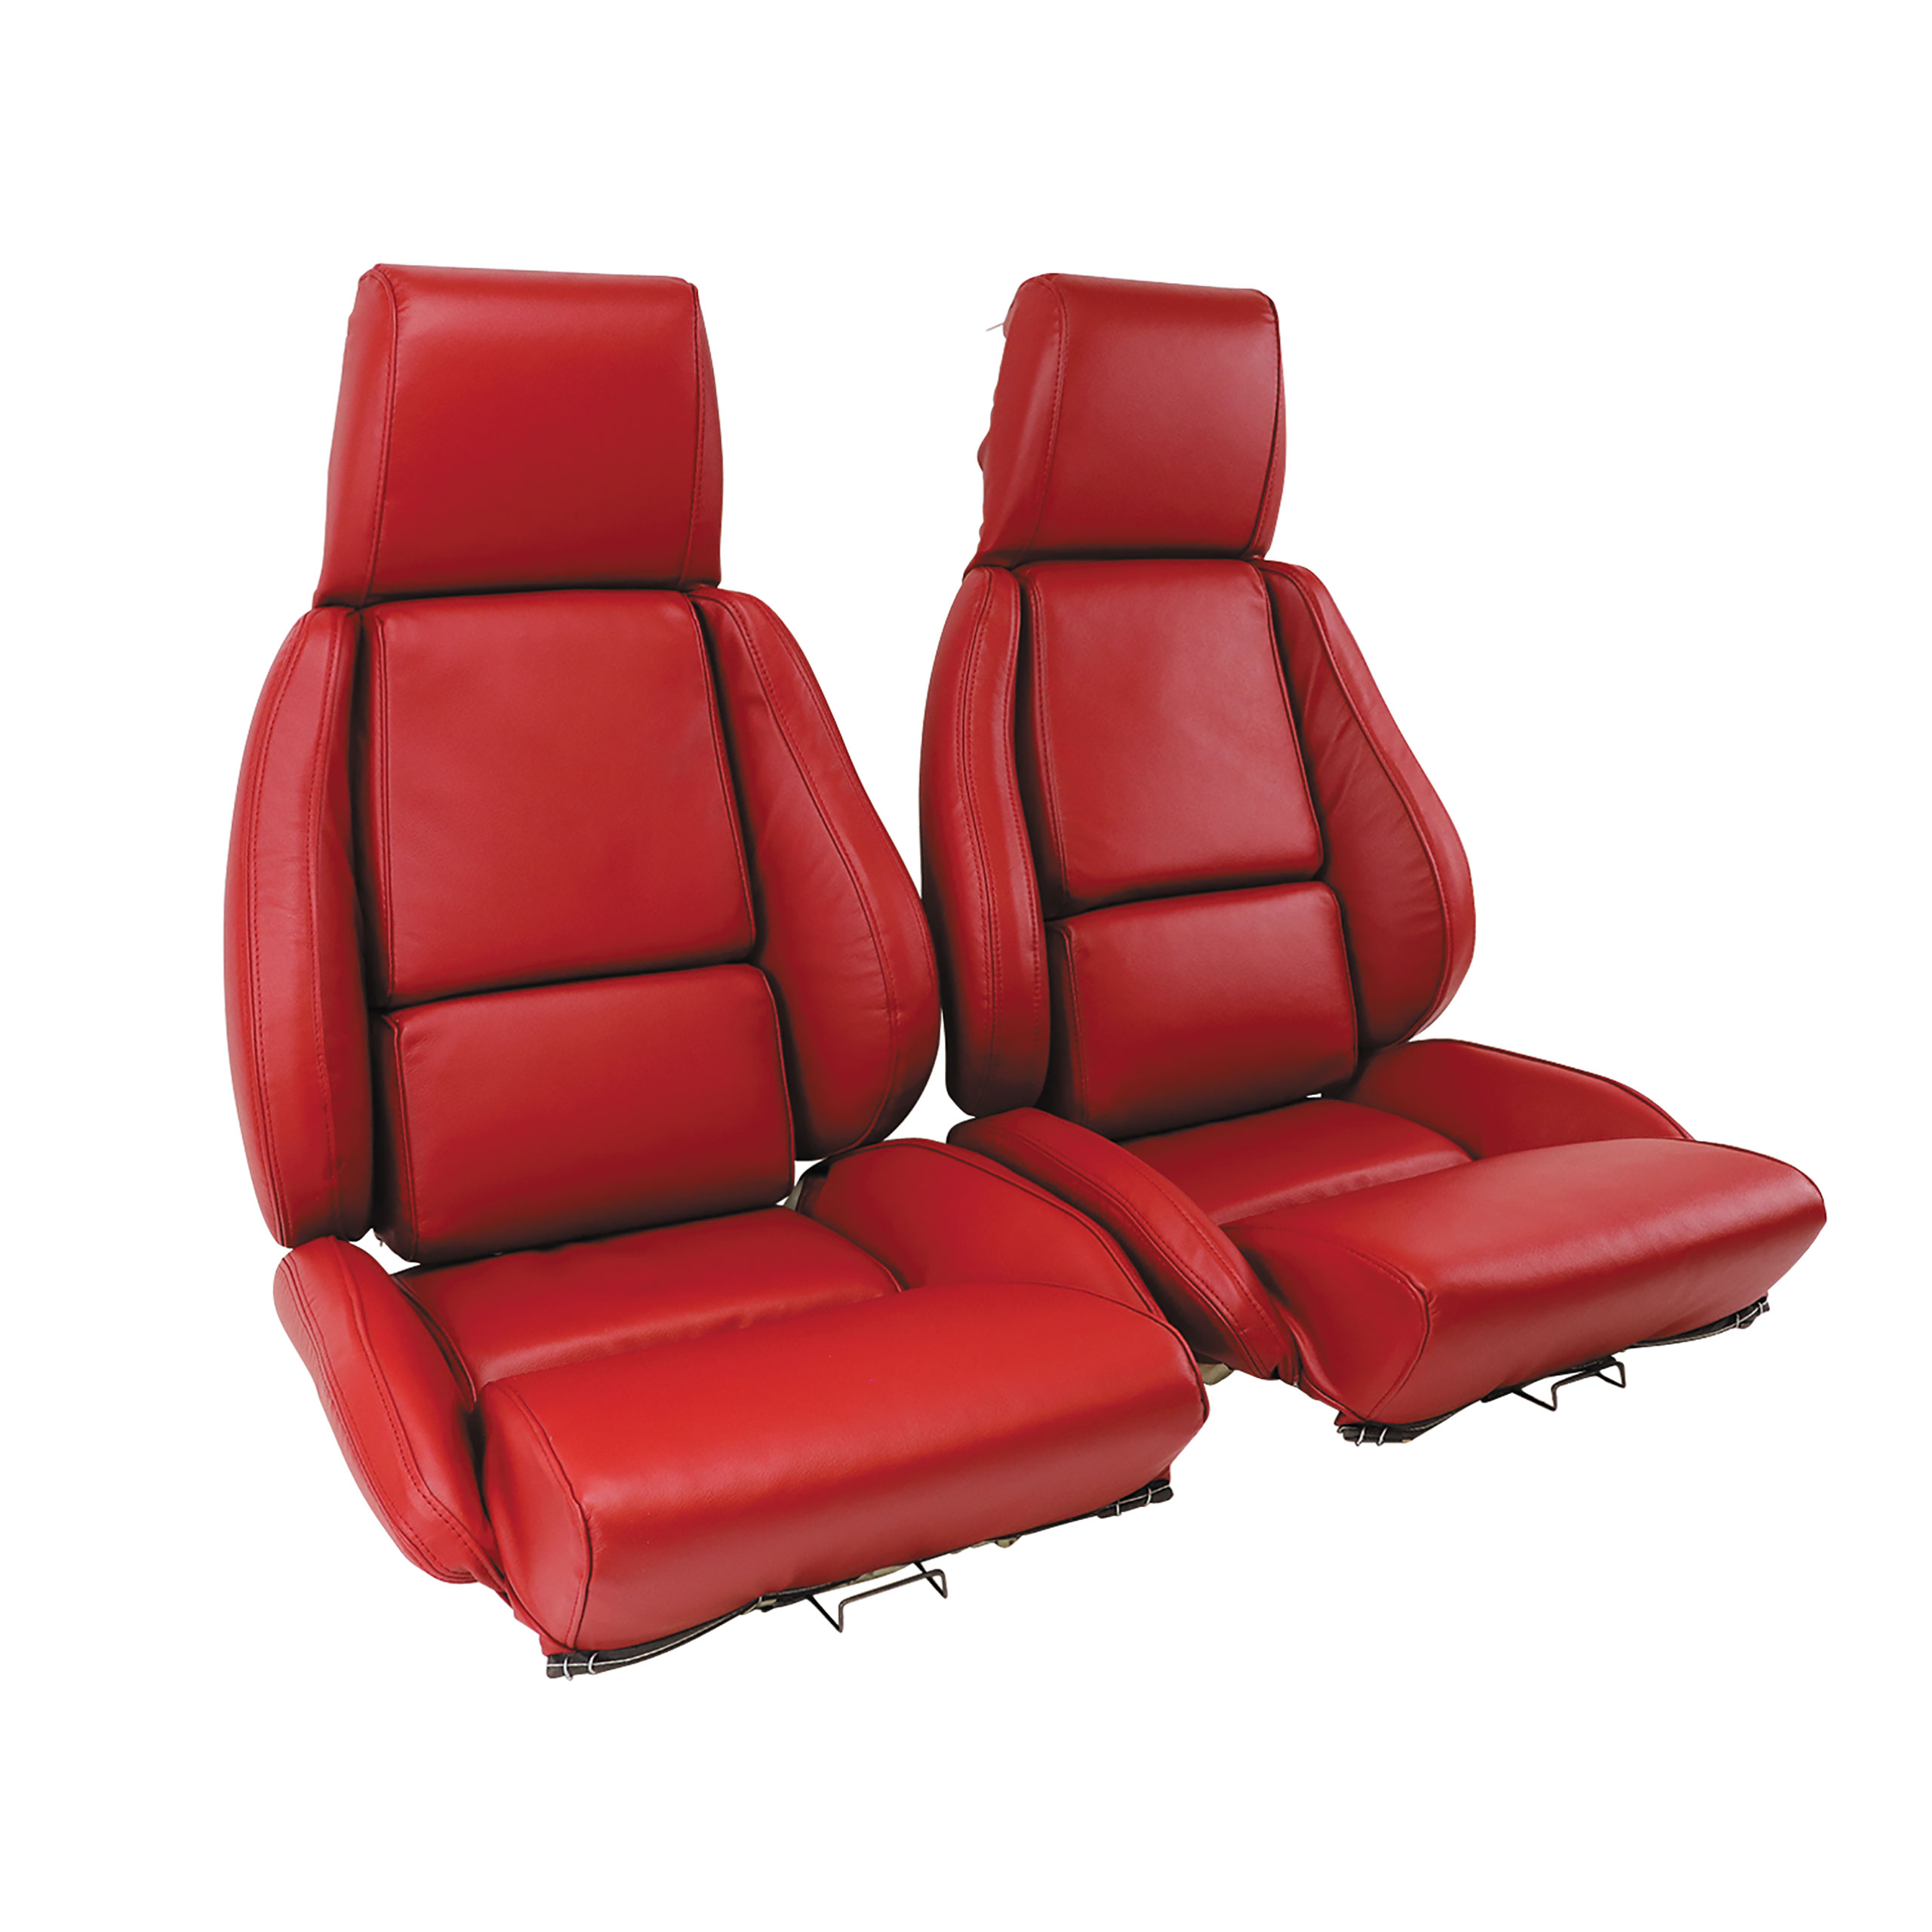 1986-1988 C4 Corvette Mounted Leather Seat Covers Red Standard No-Perforations